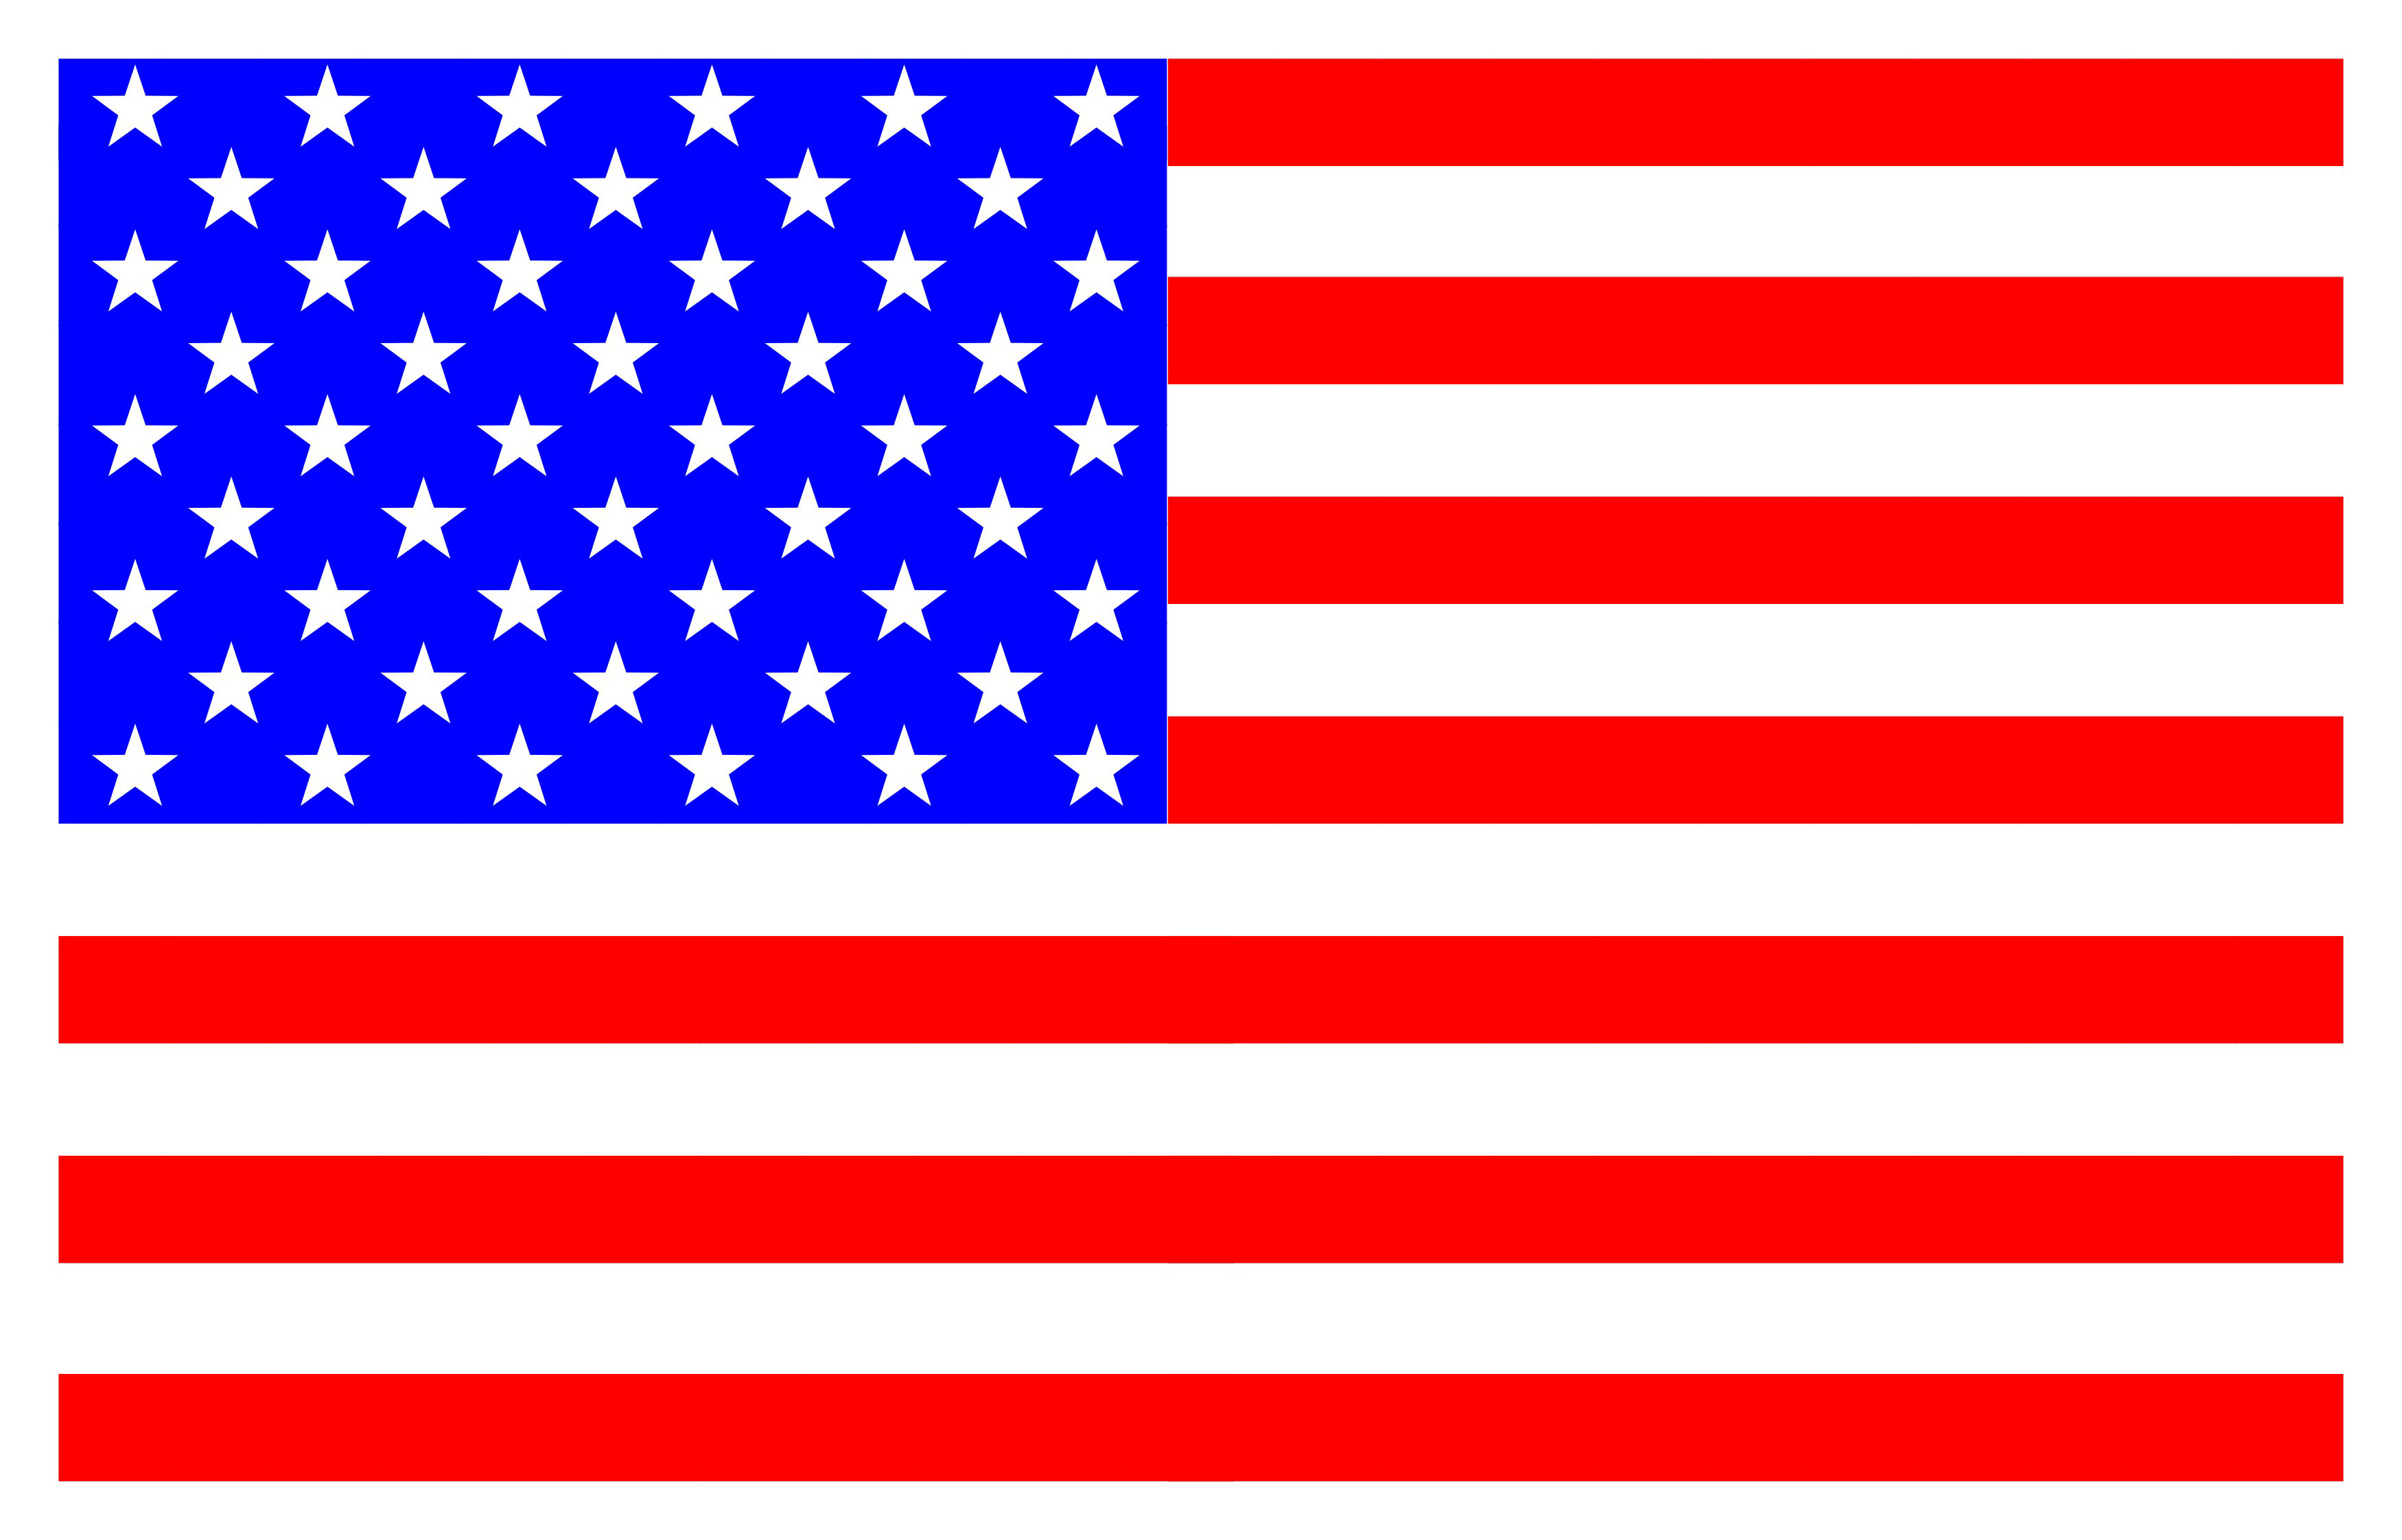 Us flag Icons - Download 1202 Free Us flag icons here